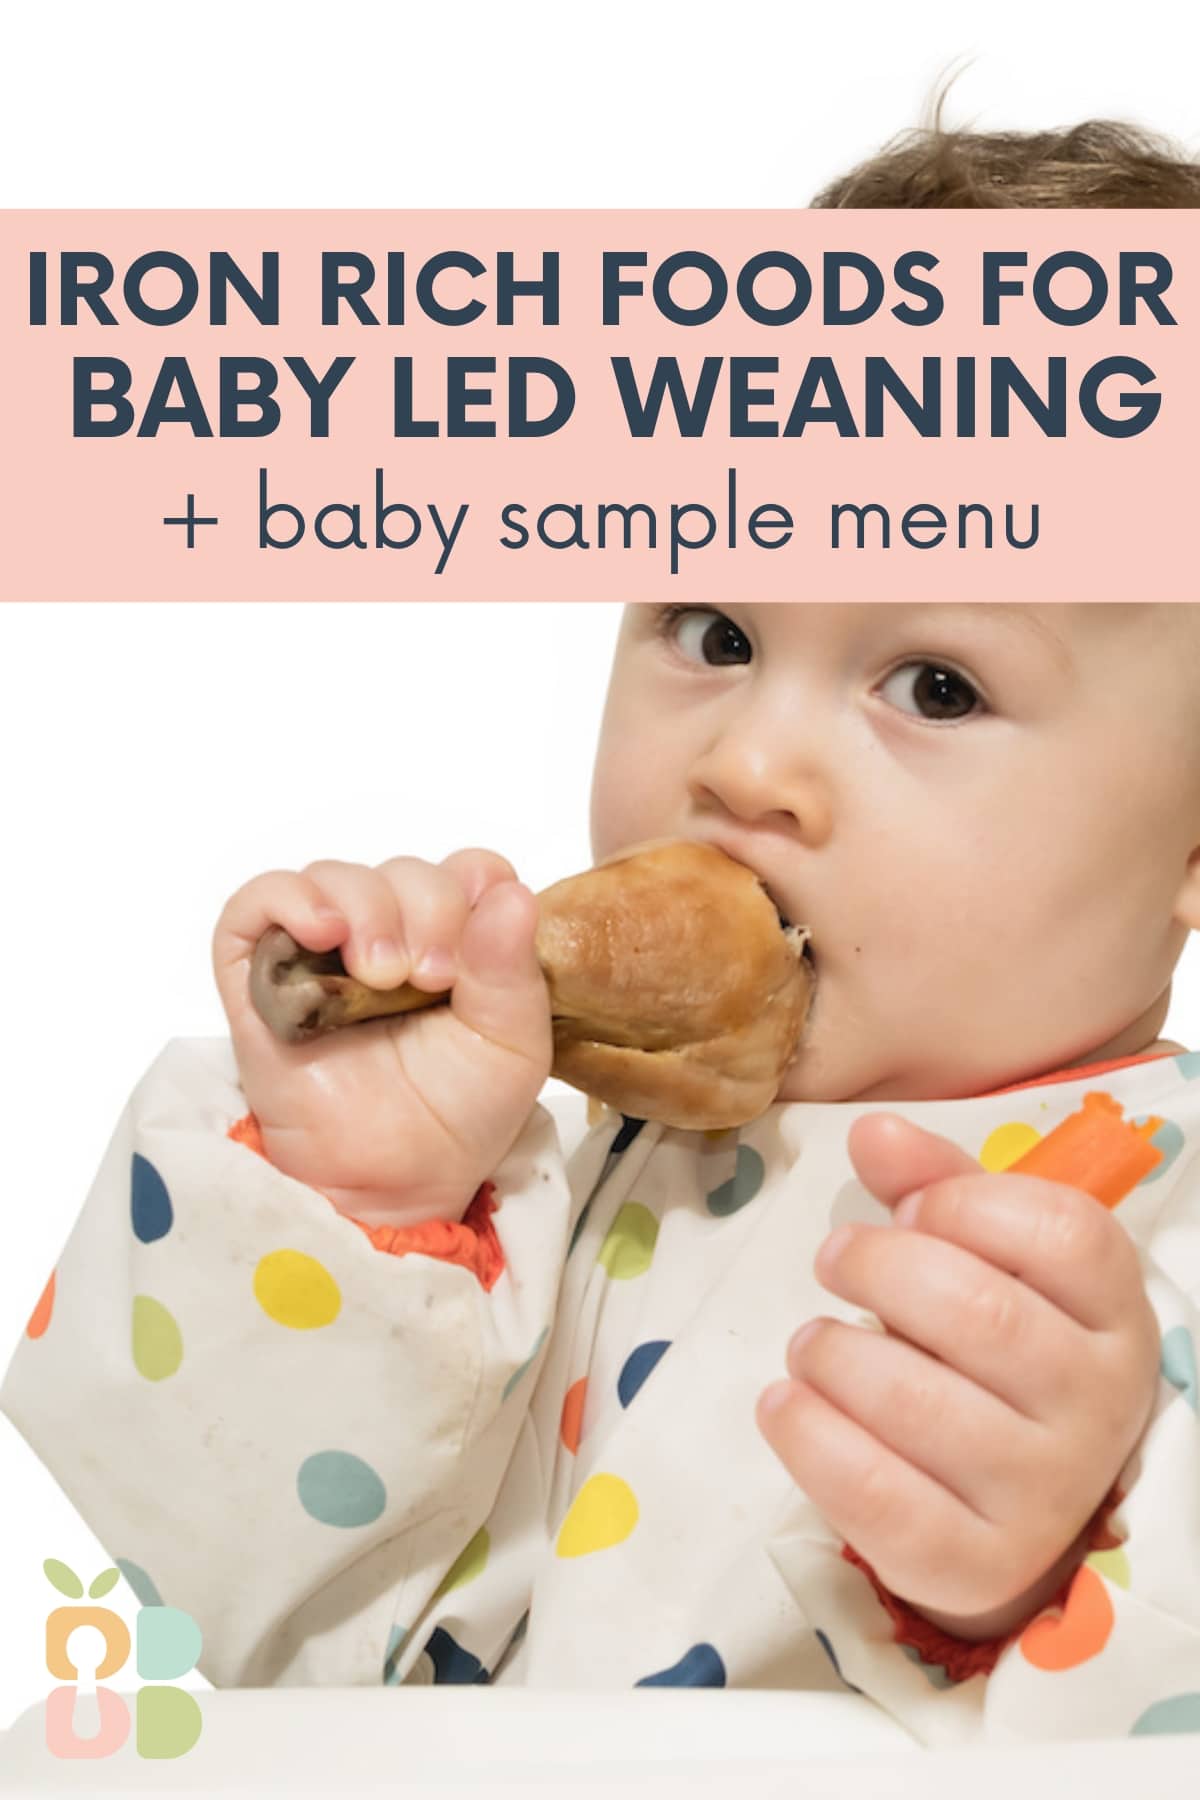 baby in a smock eating a chicken leg with text overlay.